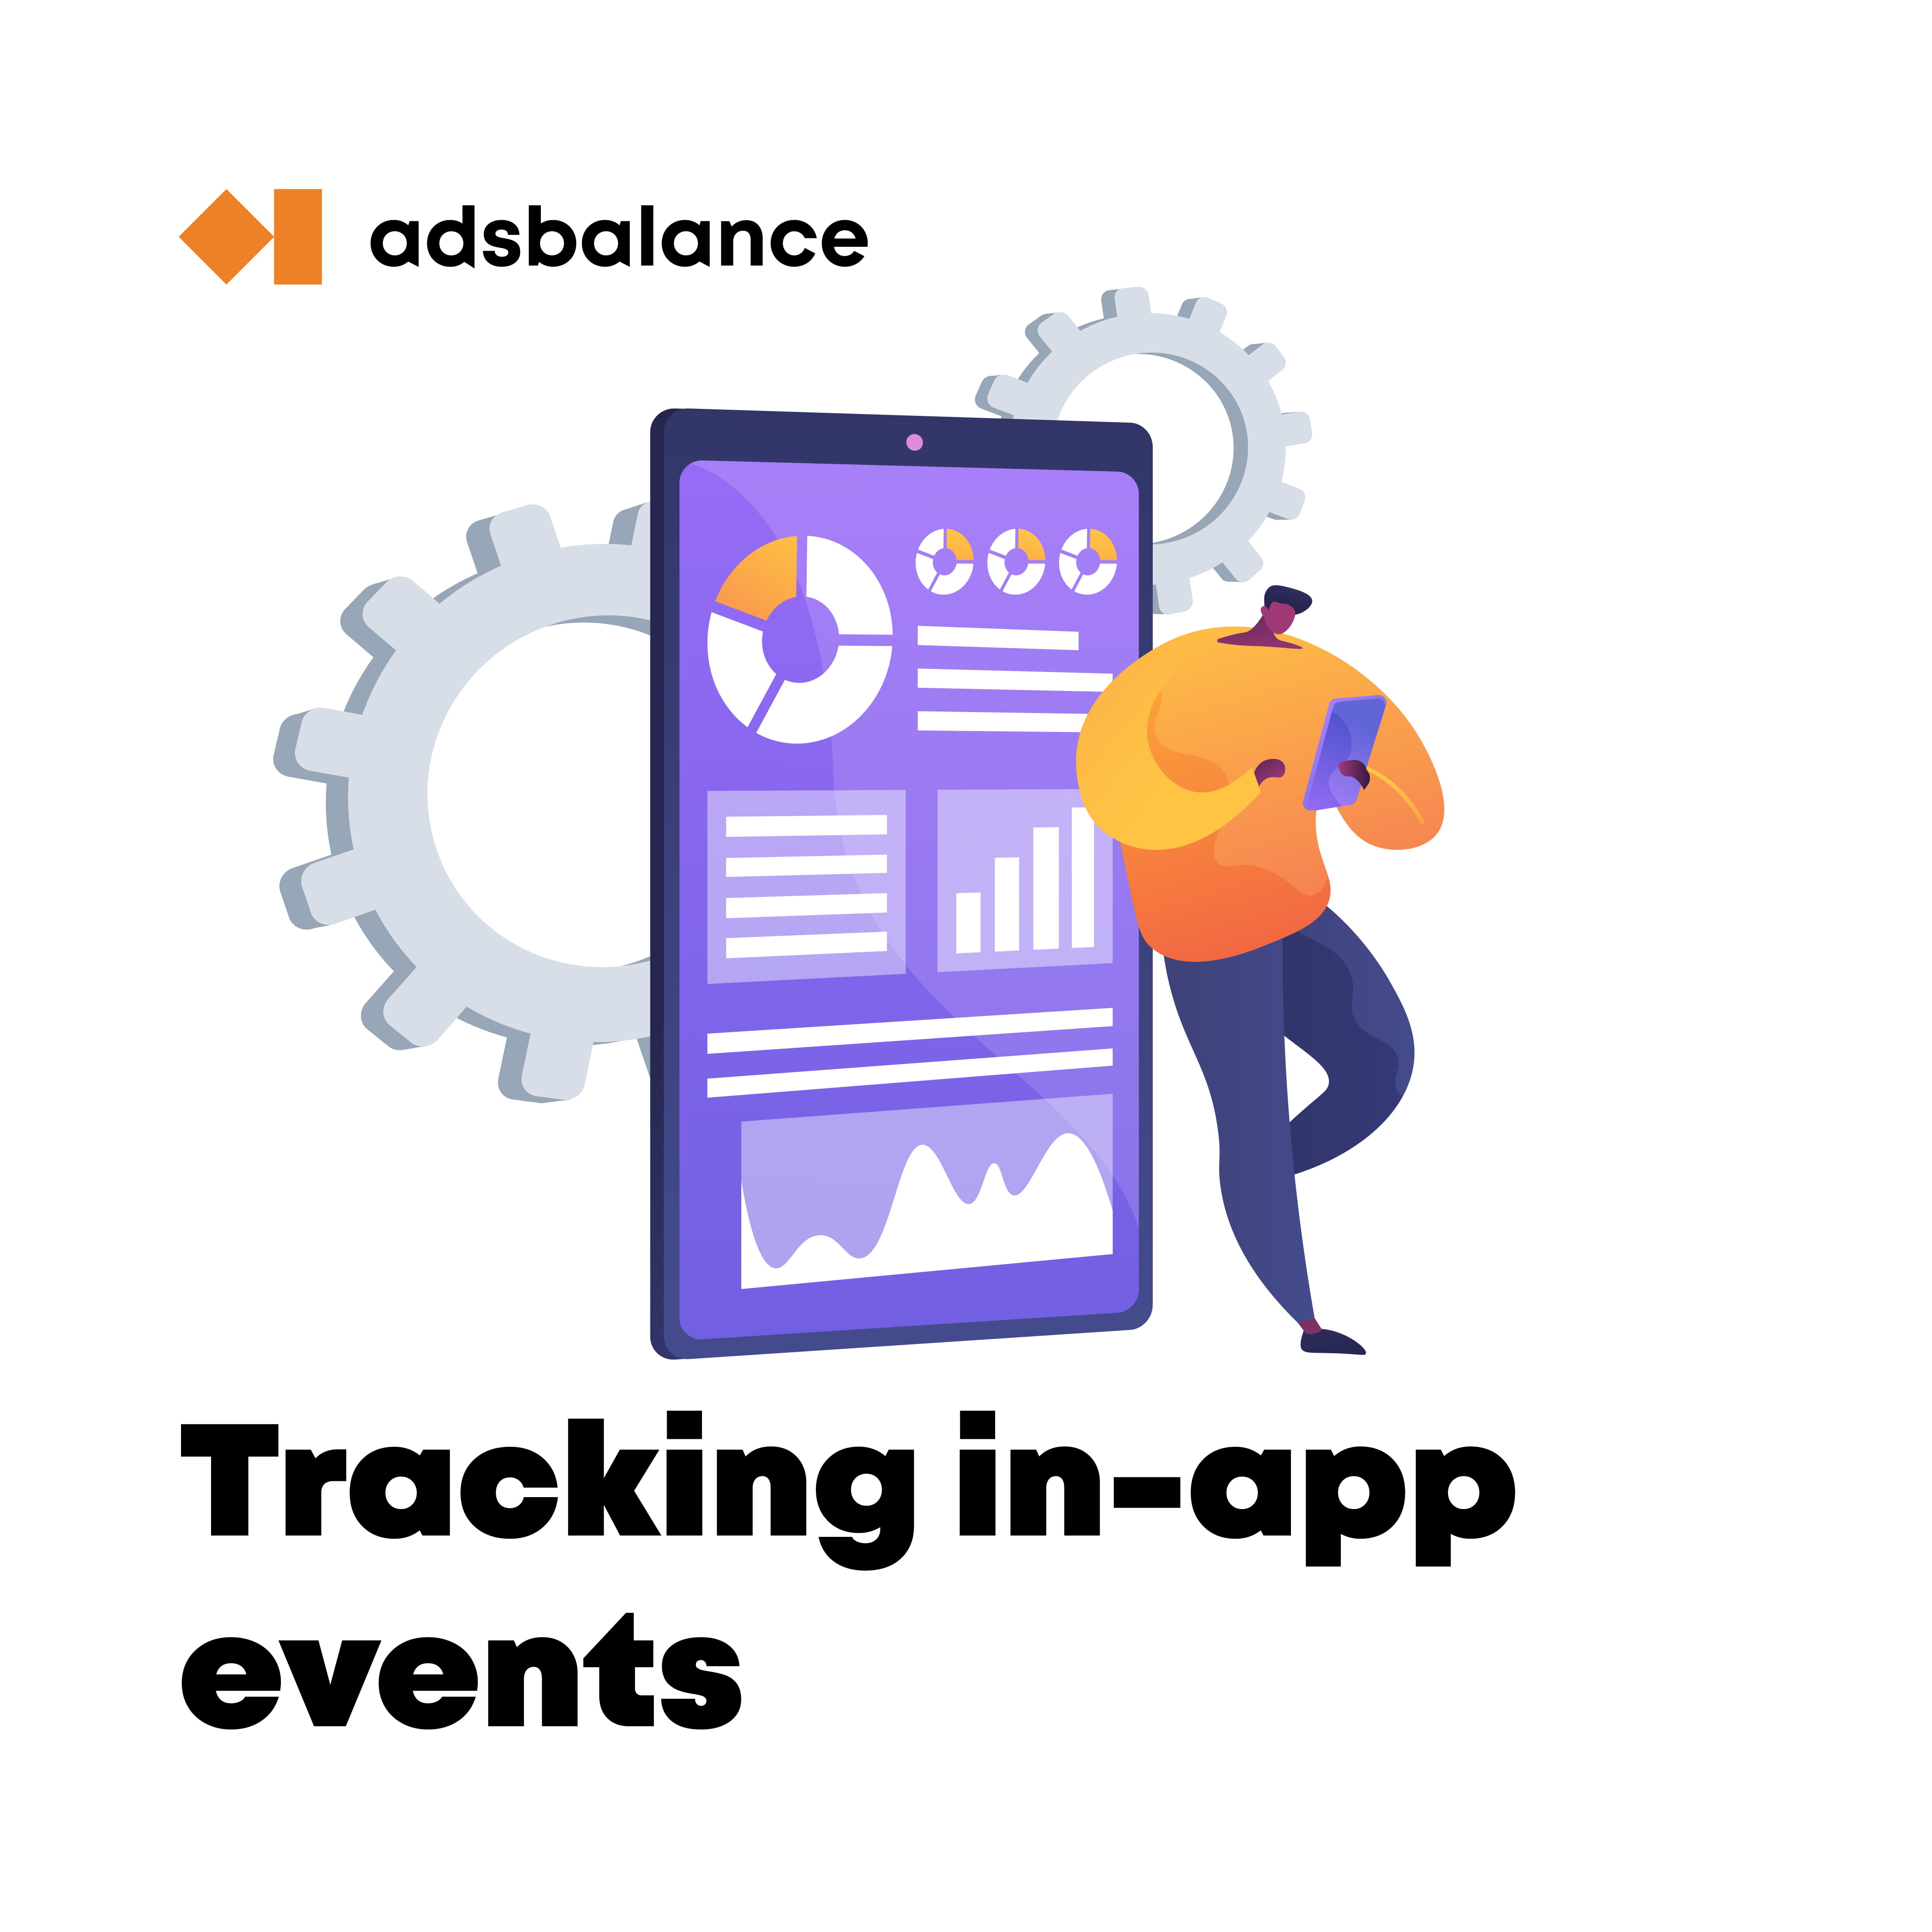 The guide to tracking in-app events